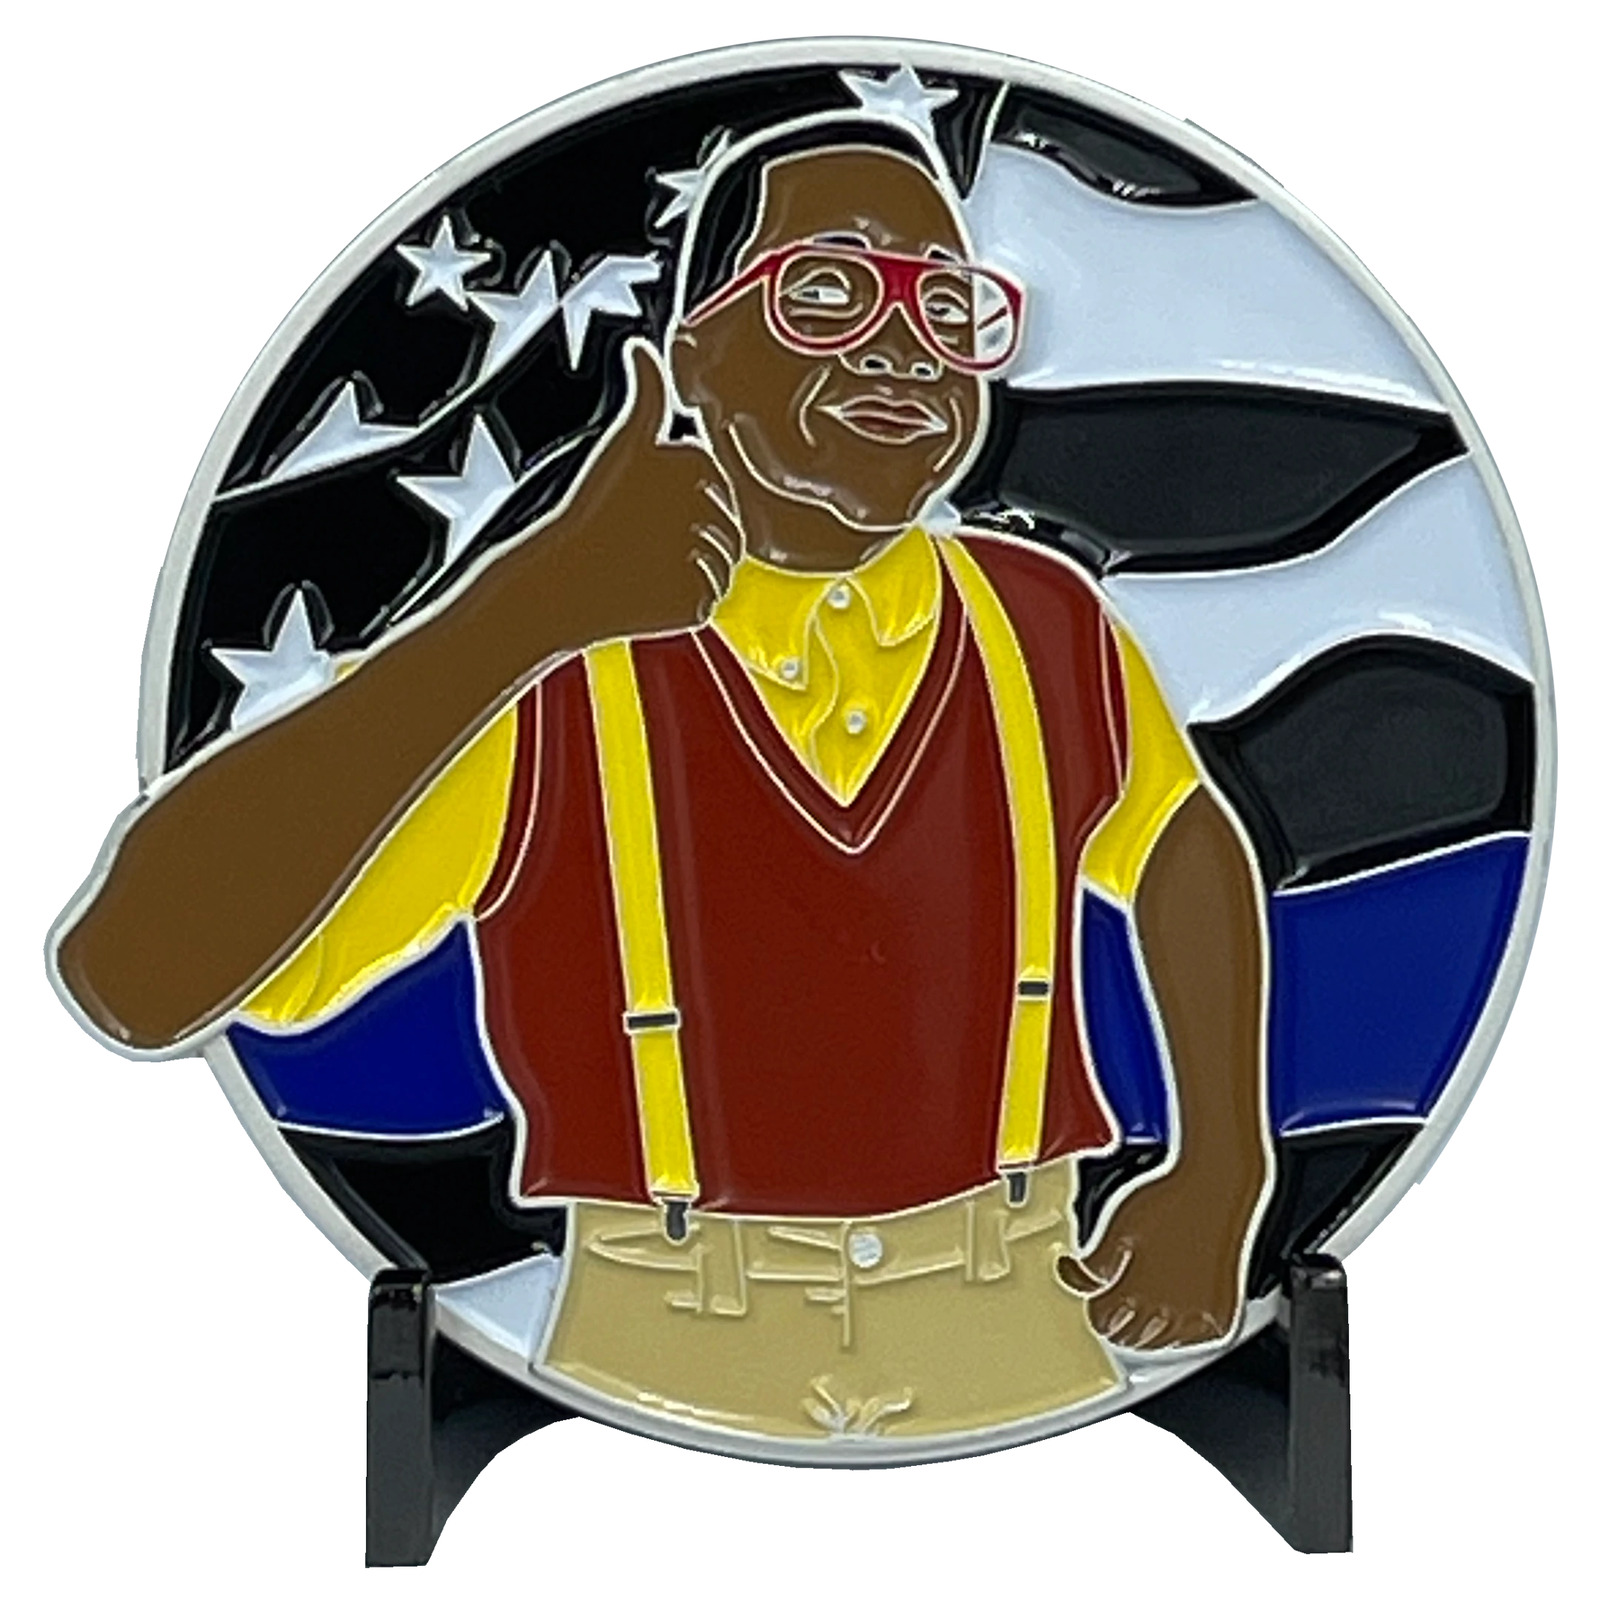 BL10-002 Urkel BLUE Family Matters thin blue line police challenge coin